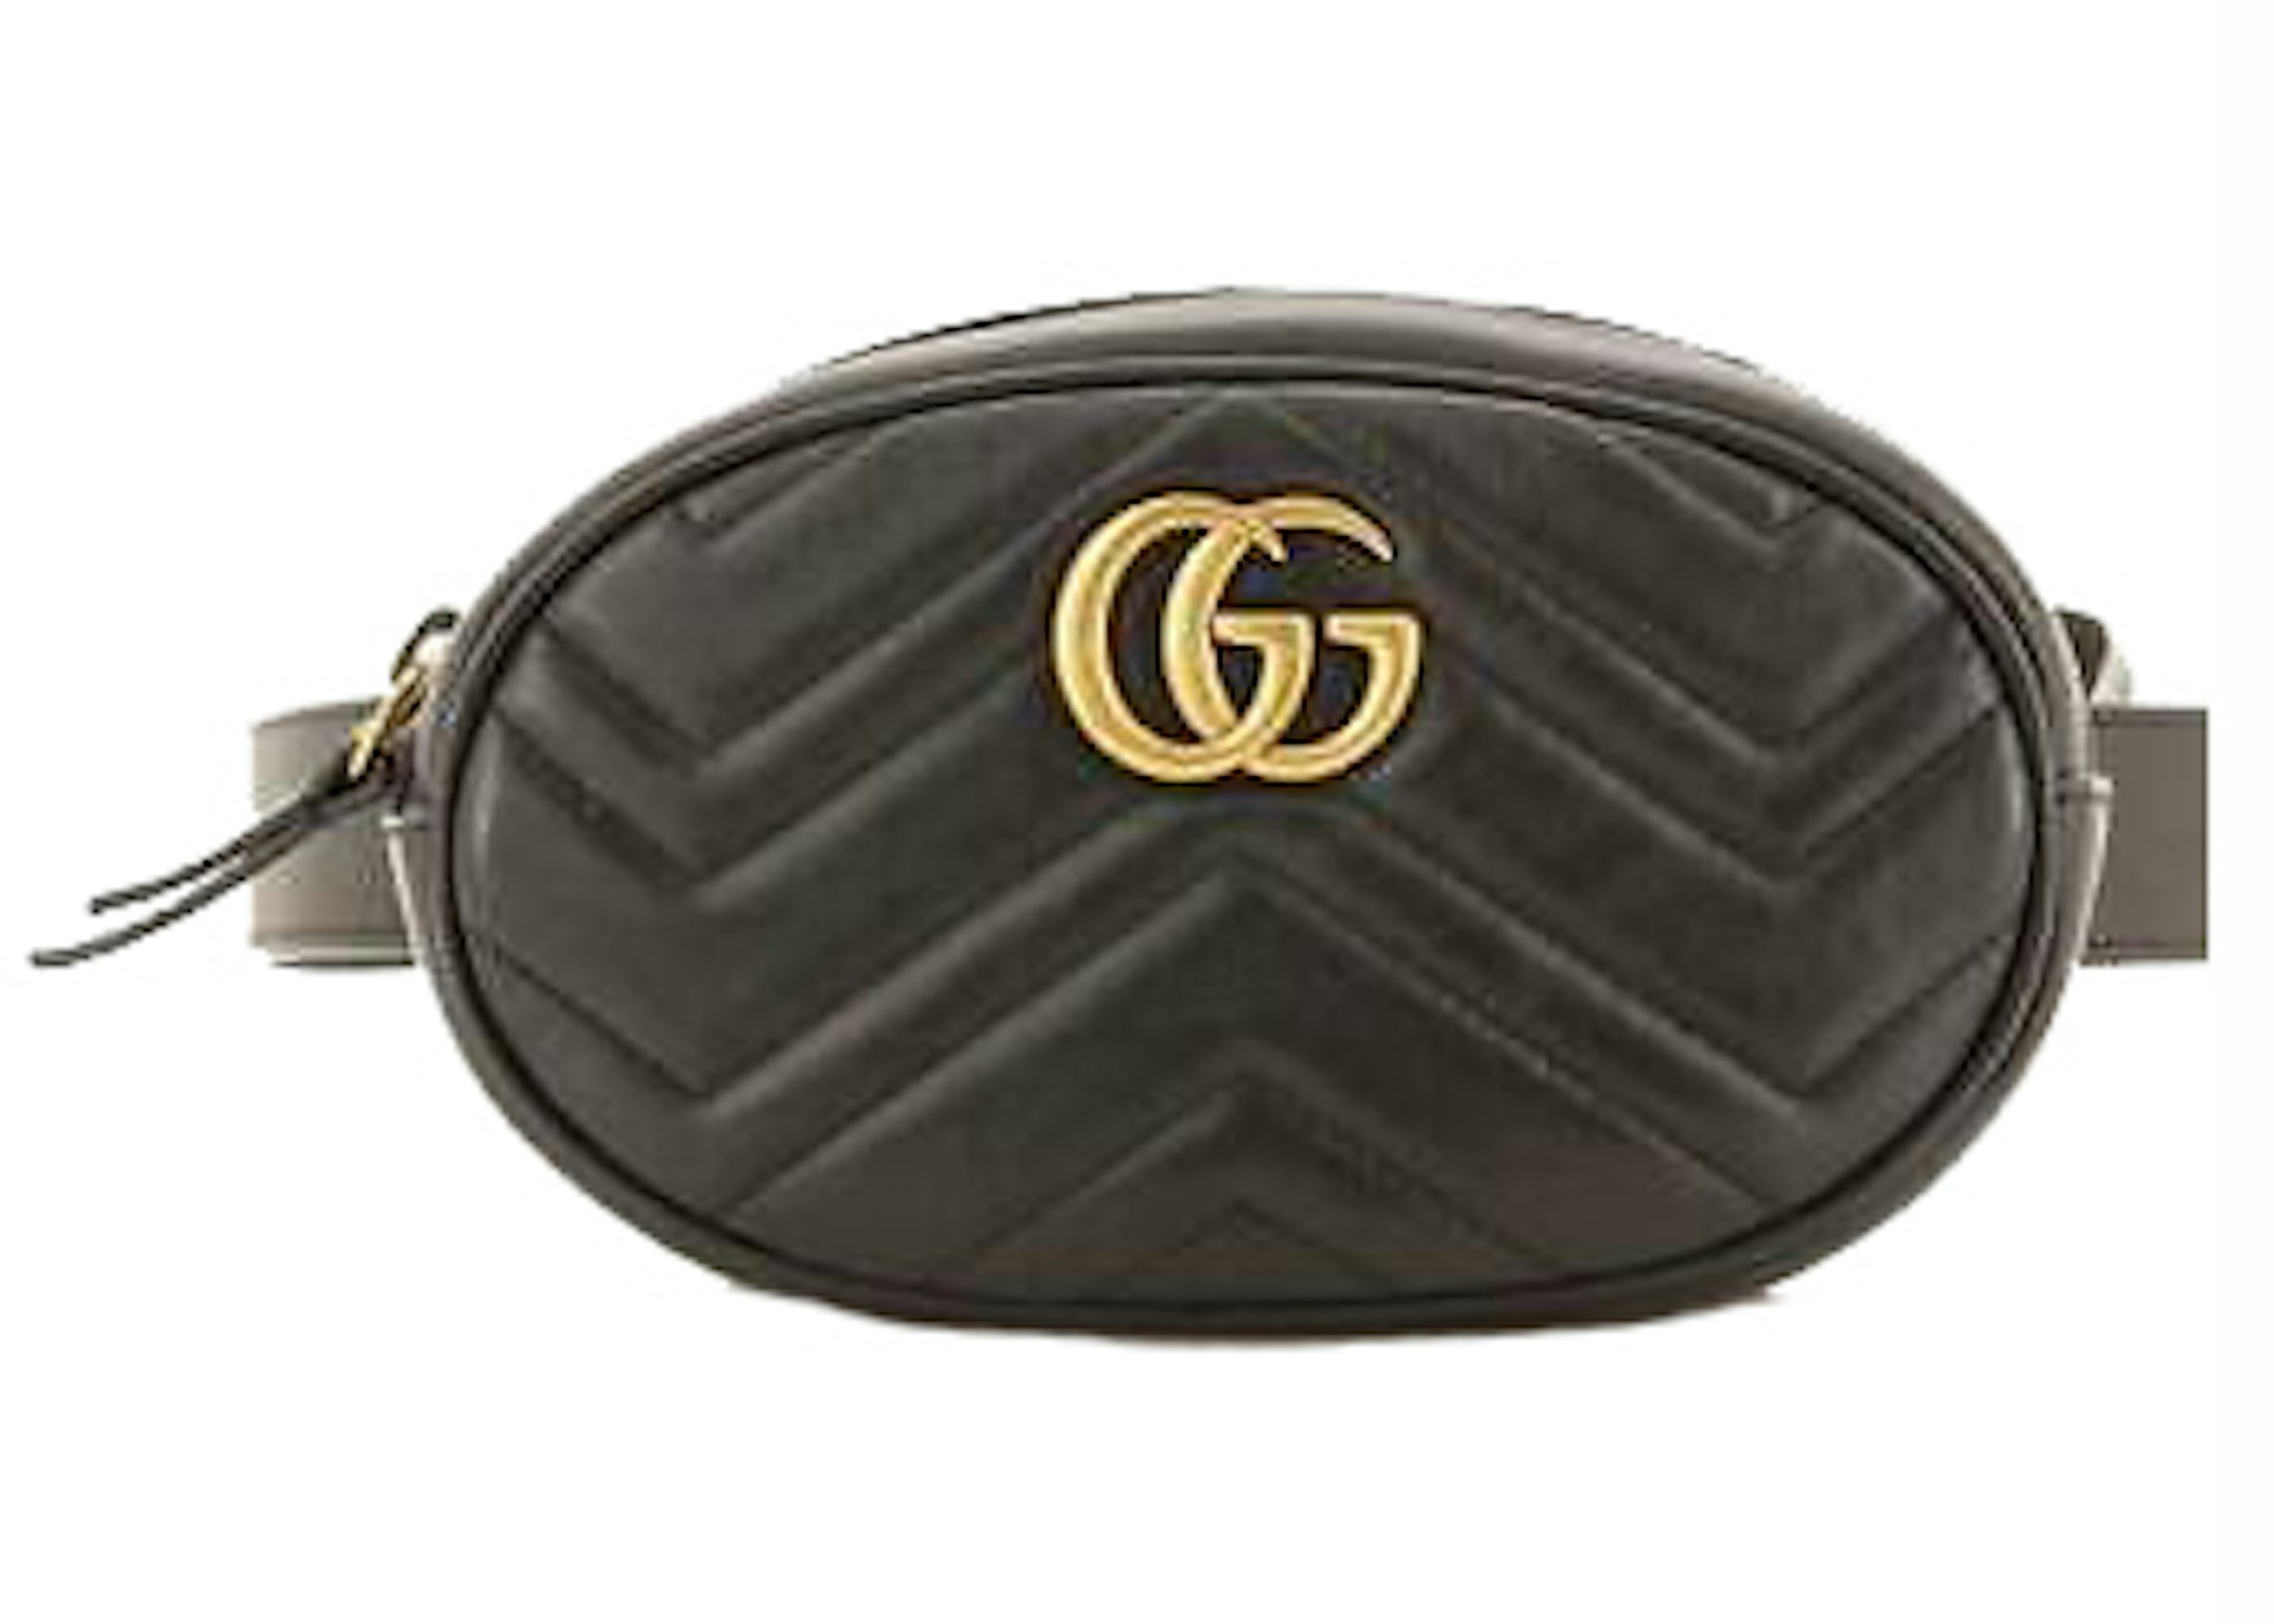 Gucci GG Marmont Belt Bag Matelasse Hibiscus Red in Leather with